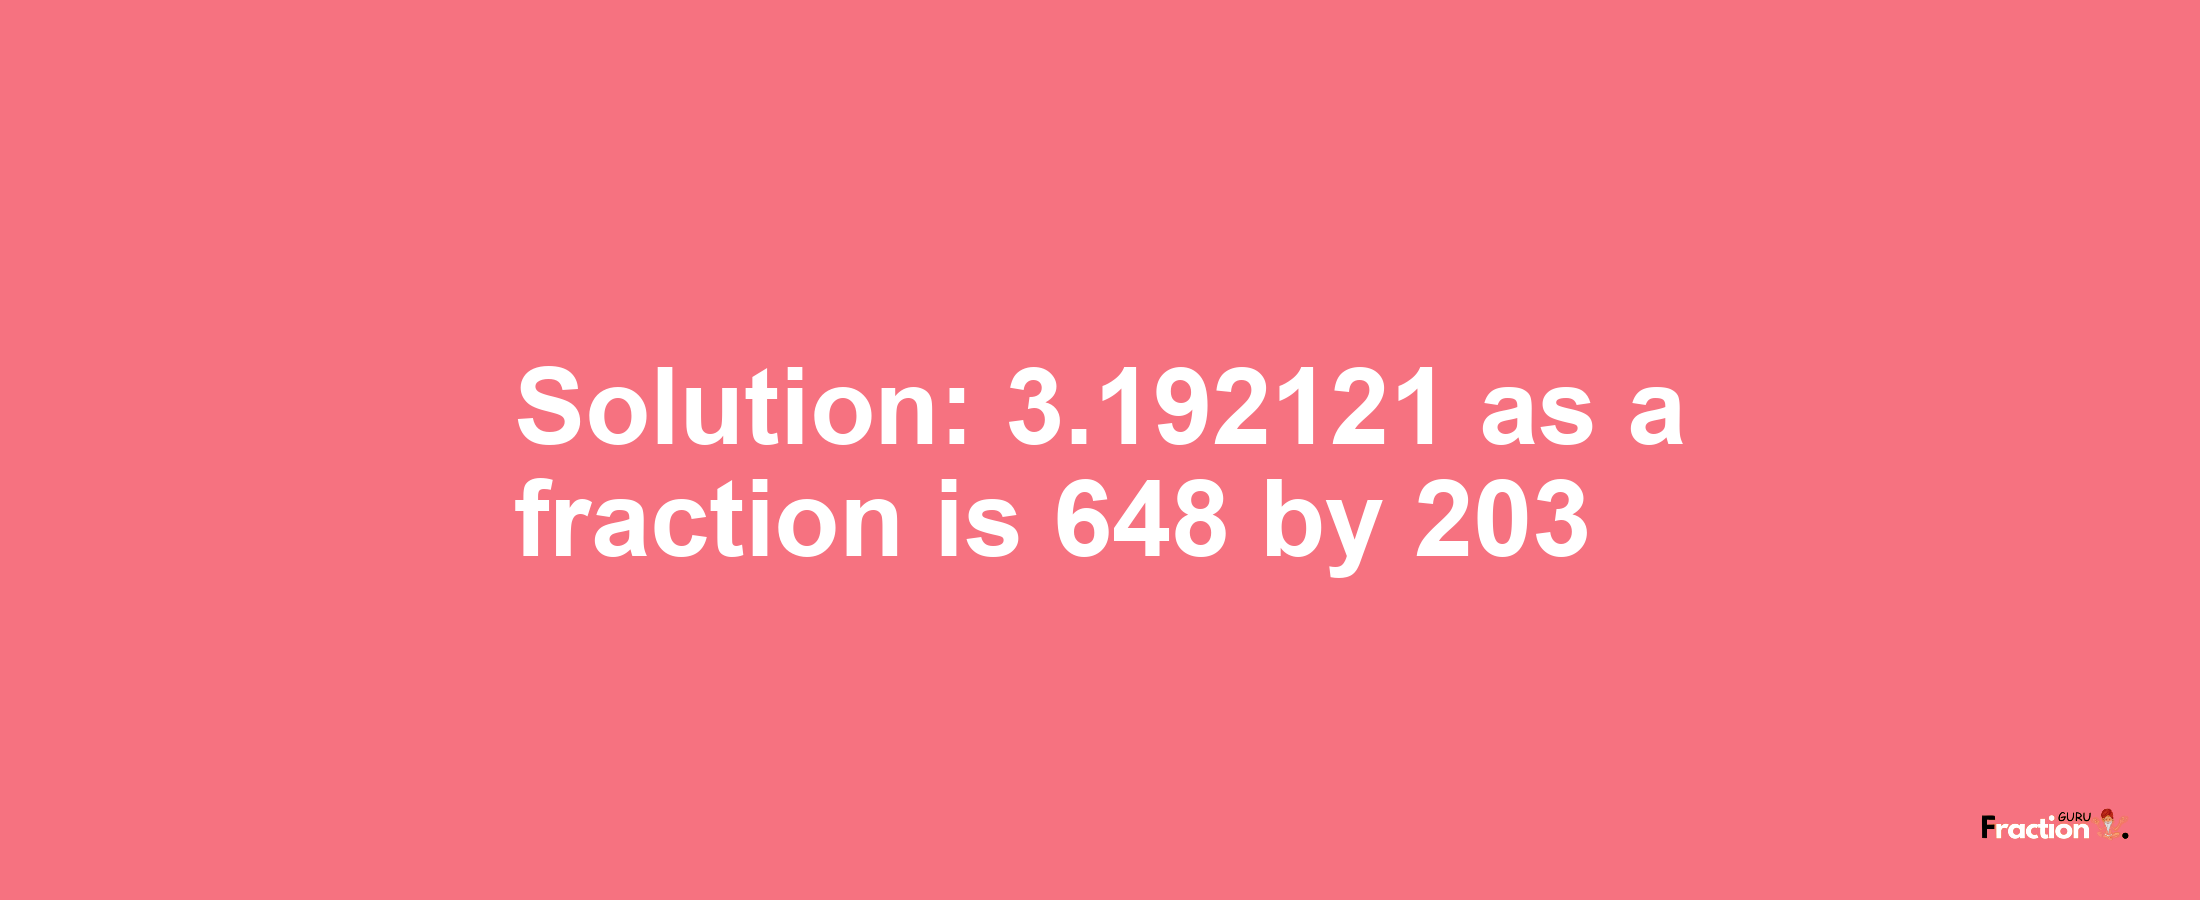 Solution:3.192121 as a fraction is 648/203